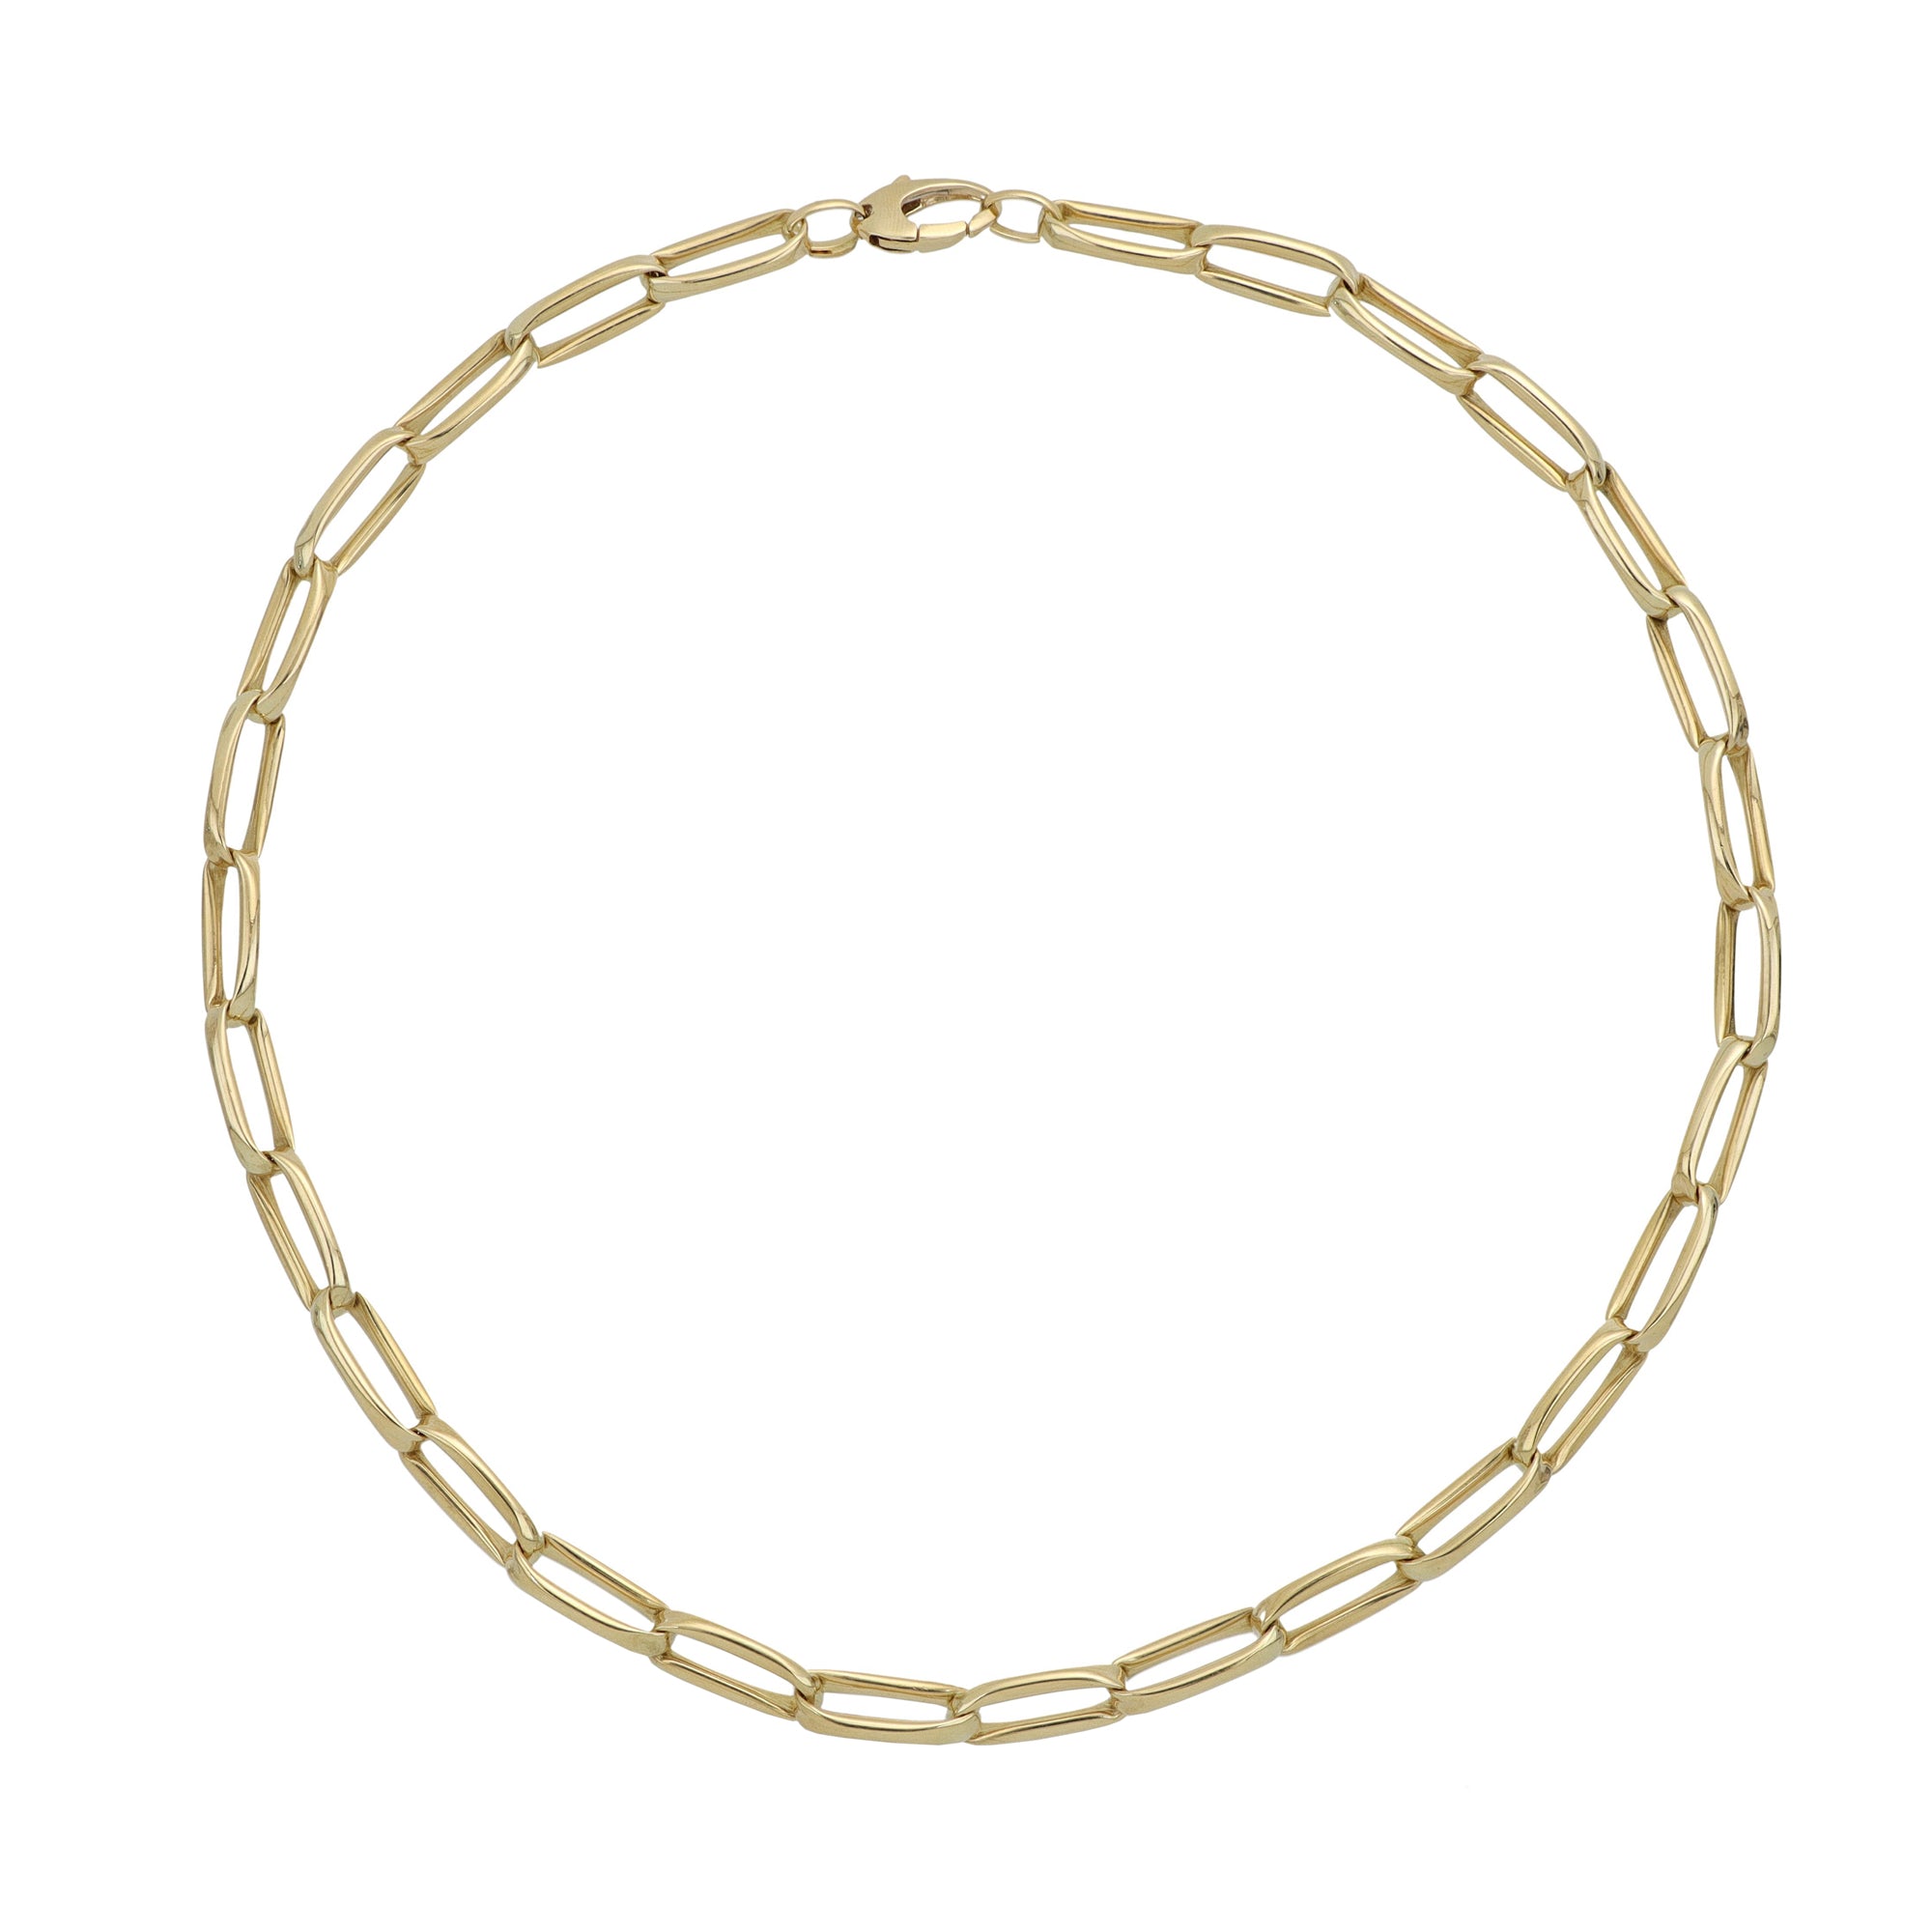 Necklace with Polished Gold Links